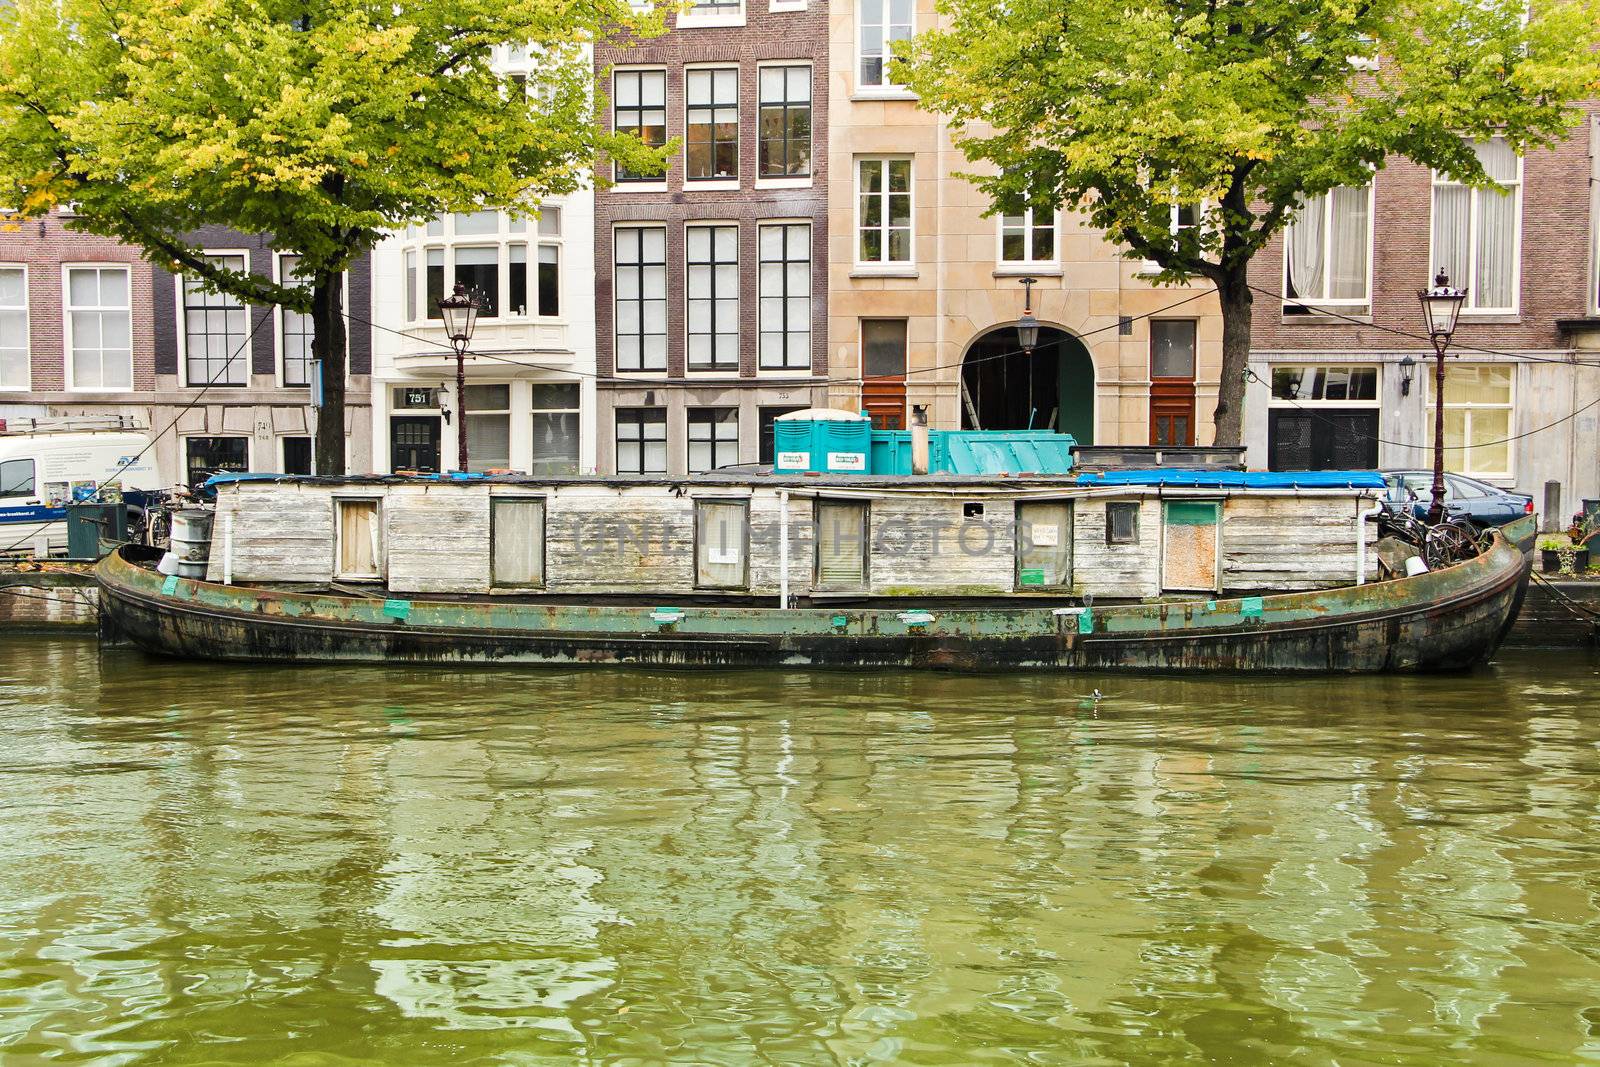 Houseboat in Amsterdam canal by doble.d